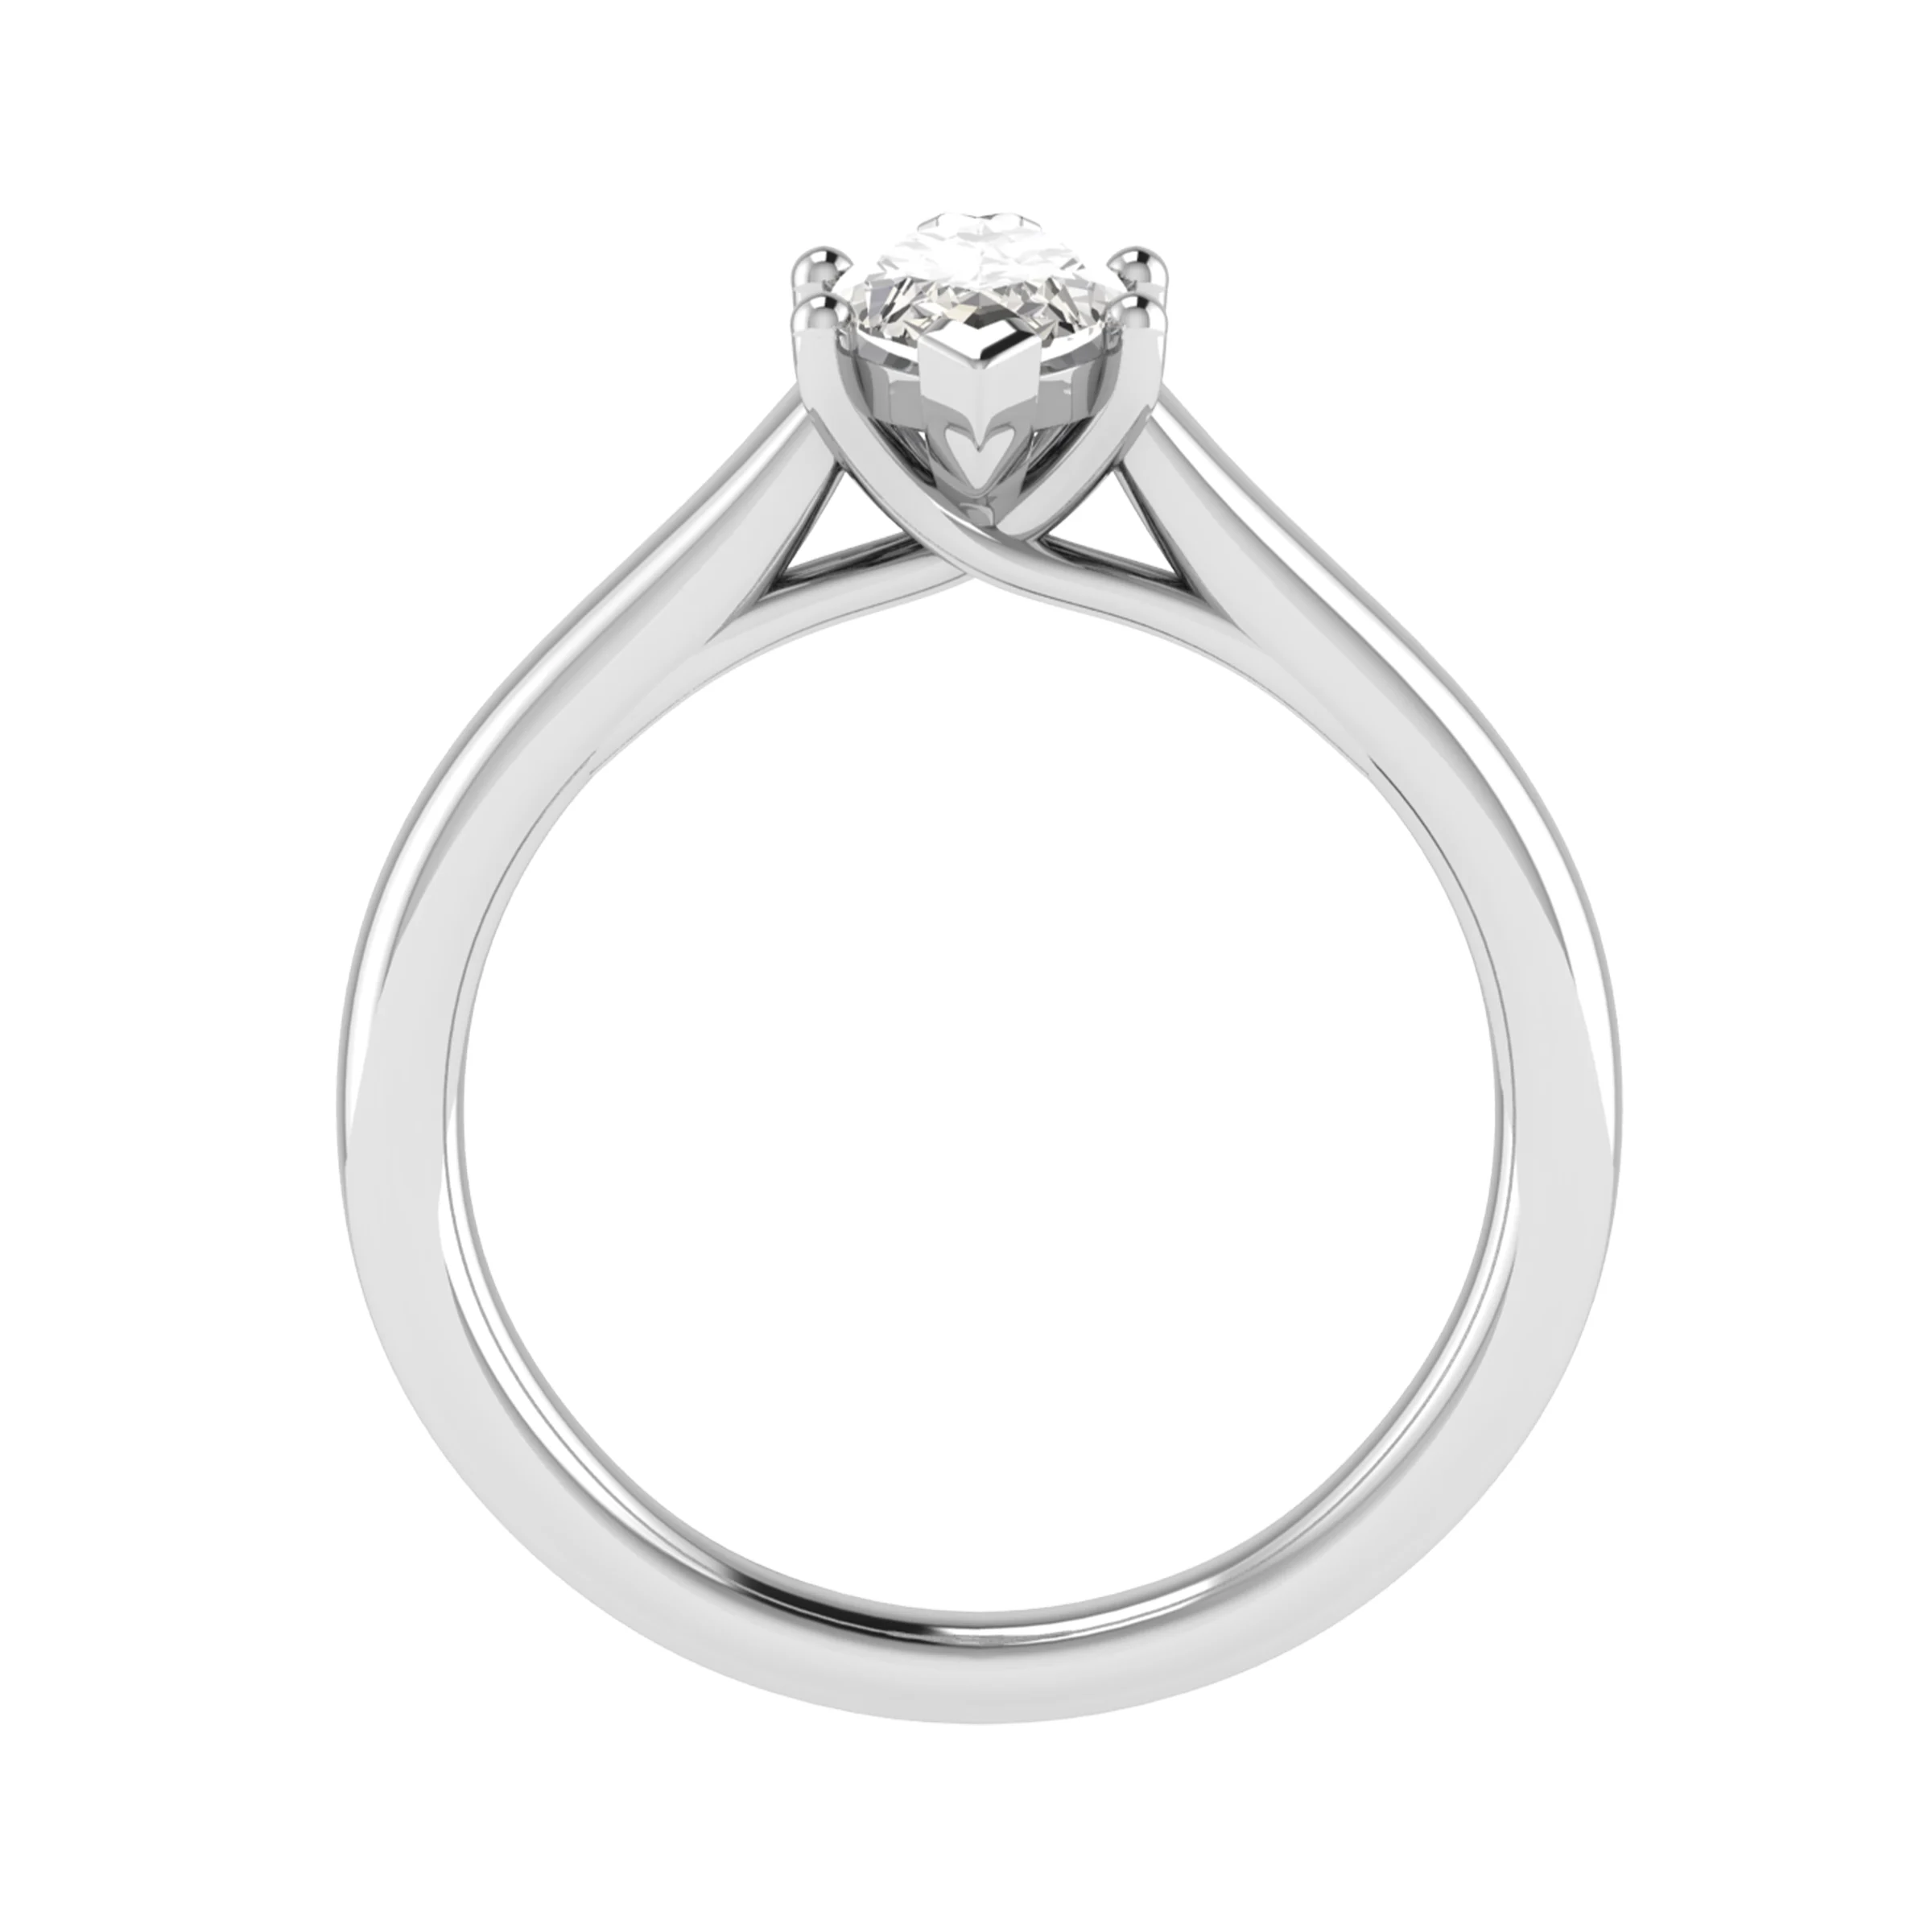 MARQUISE CUT DIAMOND SOLITAIRE ENGAGEMENT RING